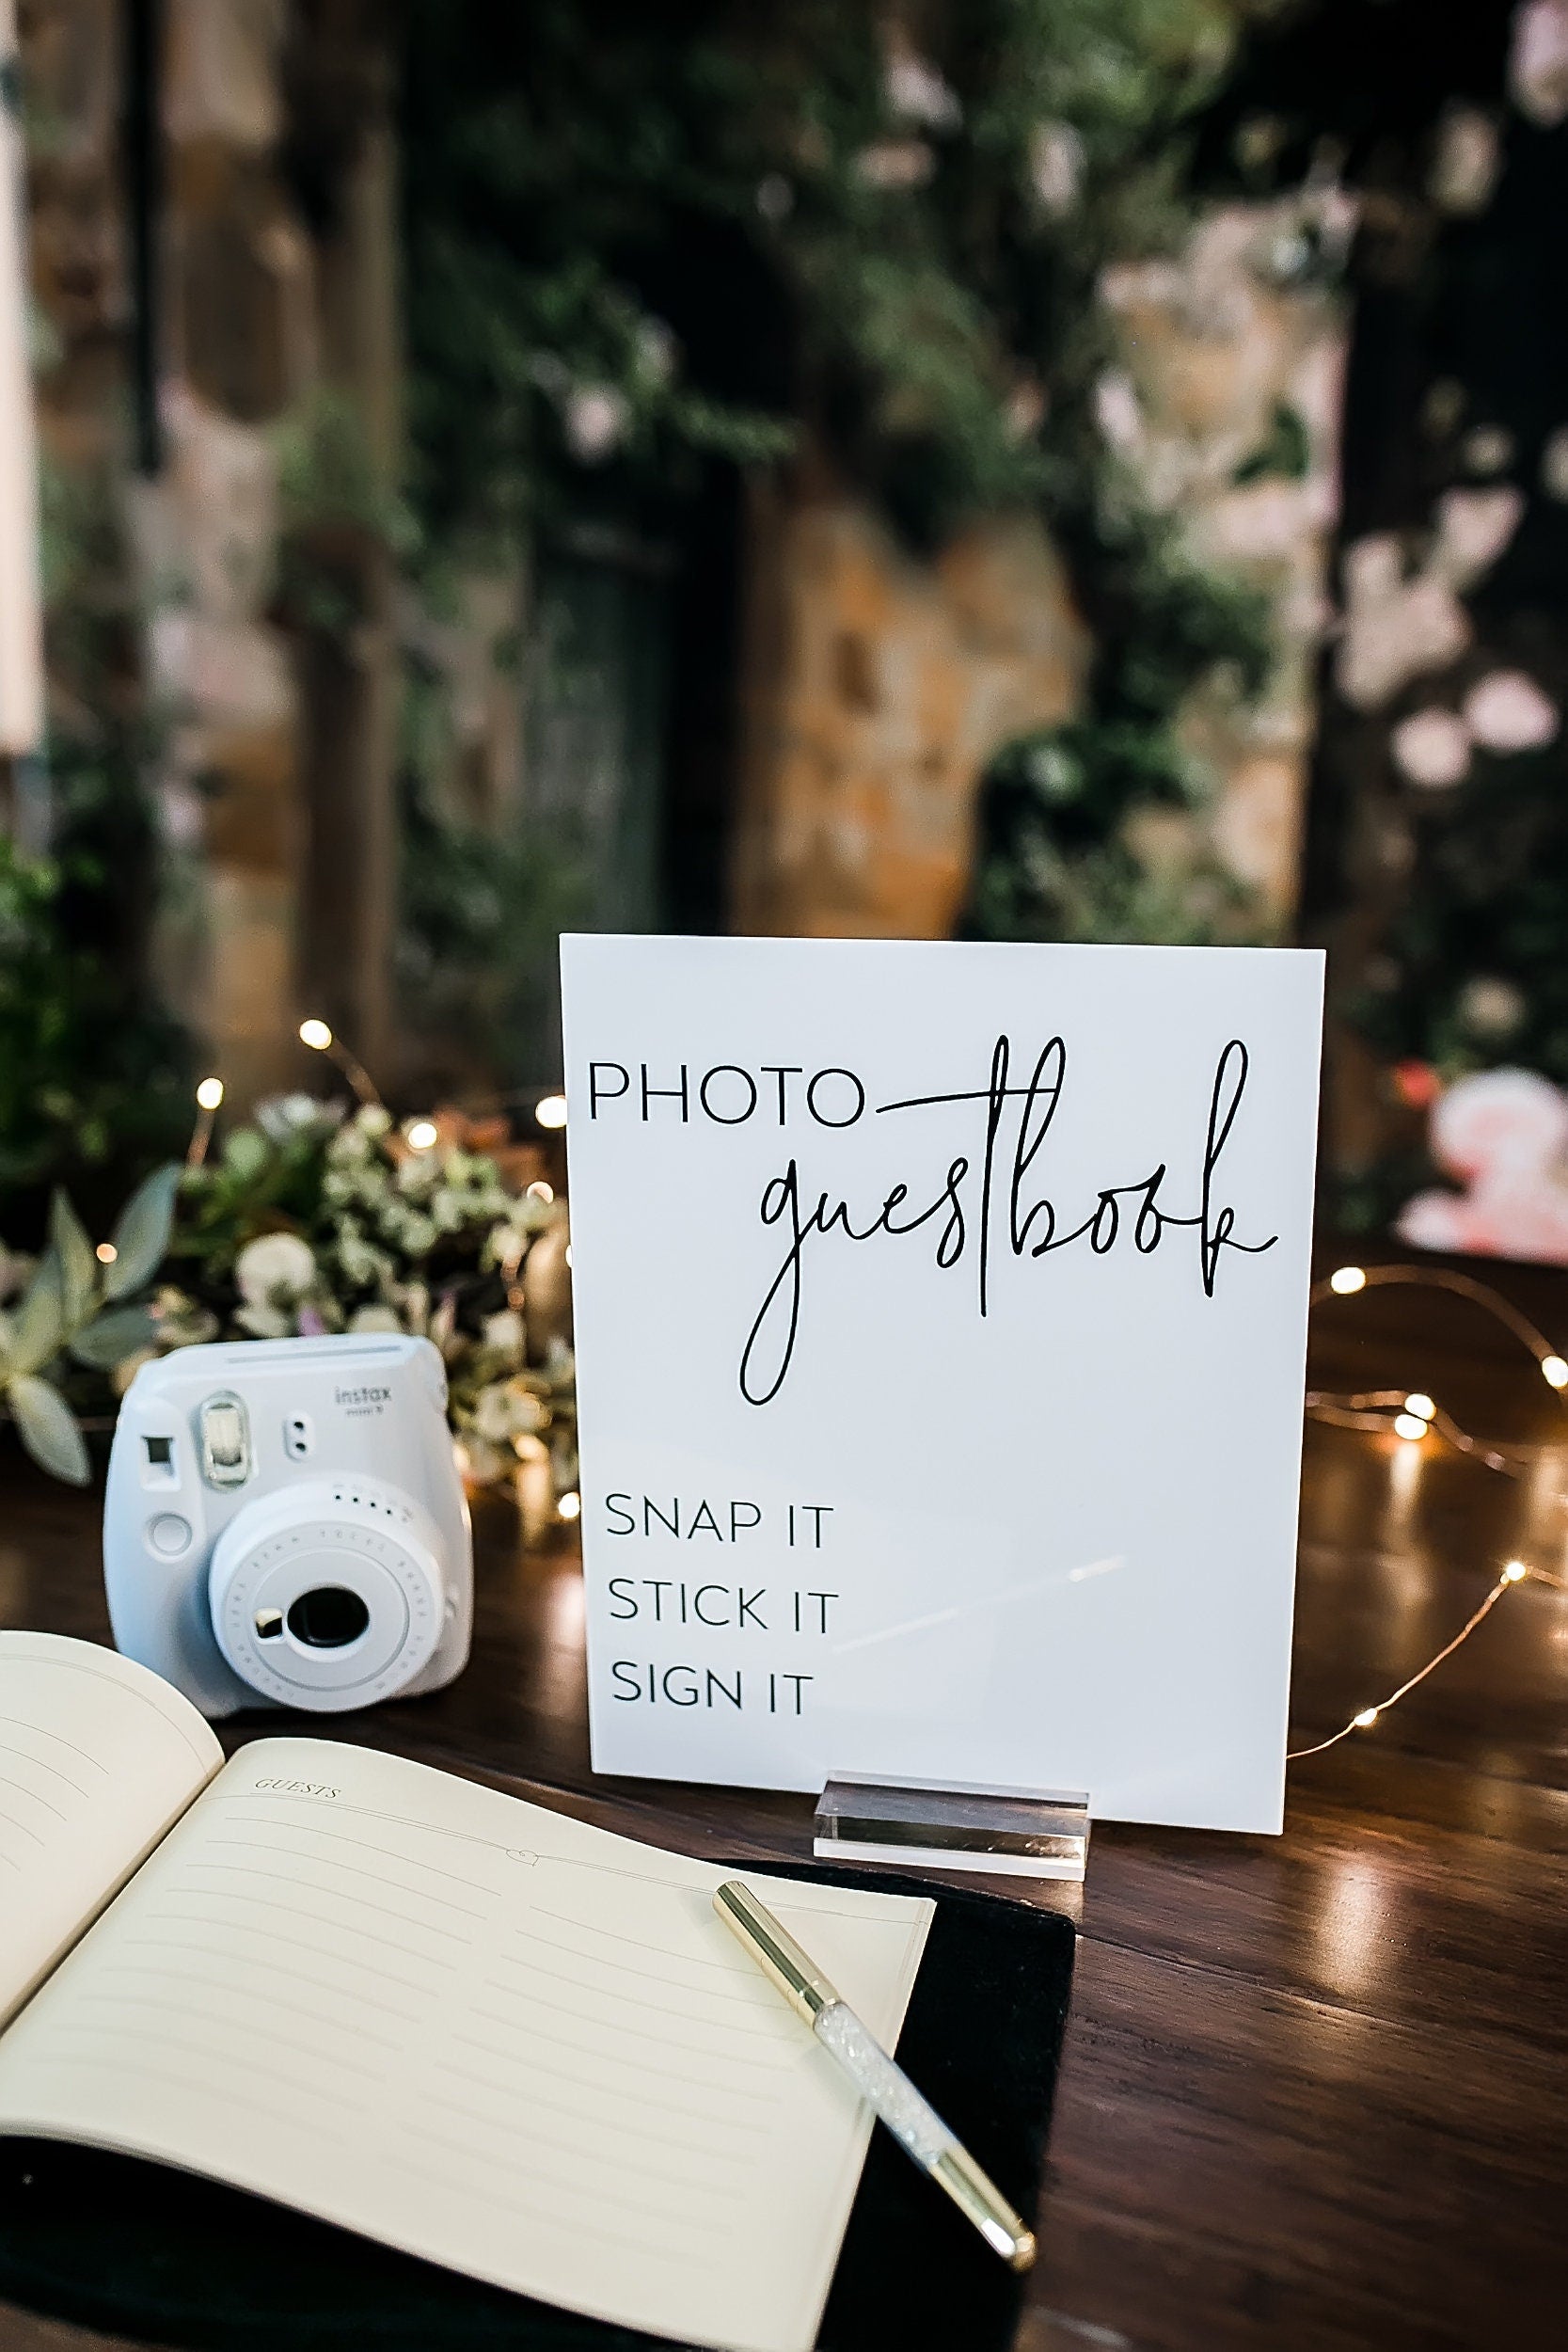 Photo Guestbook Snap It Stick It Sign It S3-PGB2